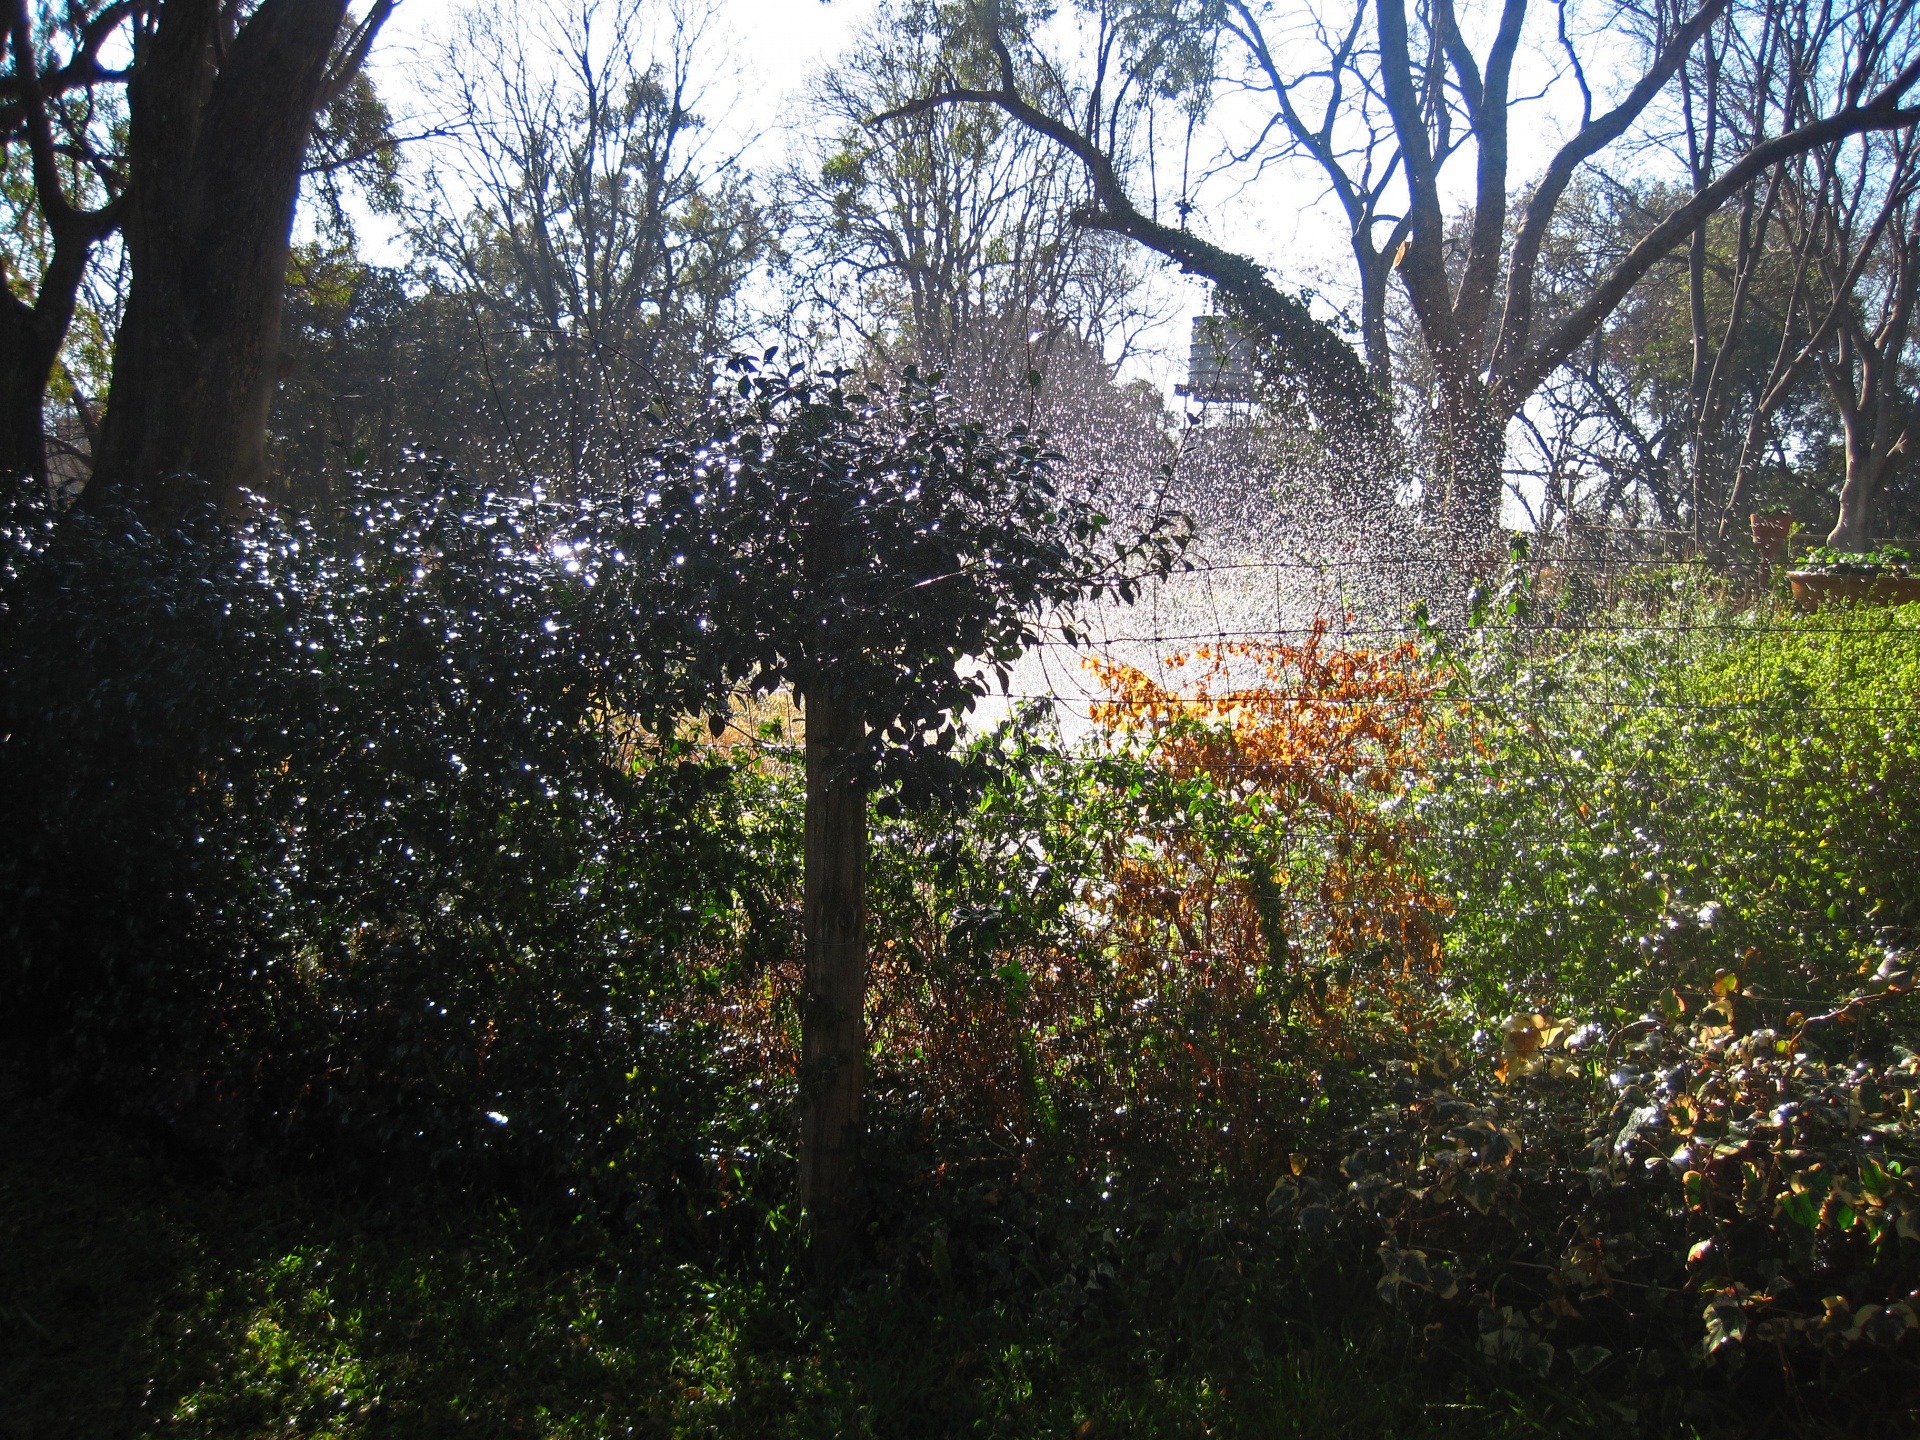 water spraying in a country garden